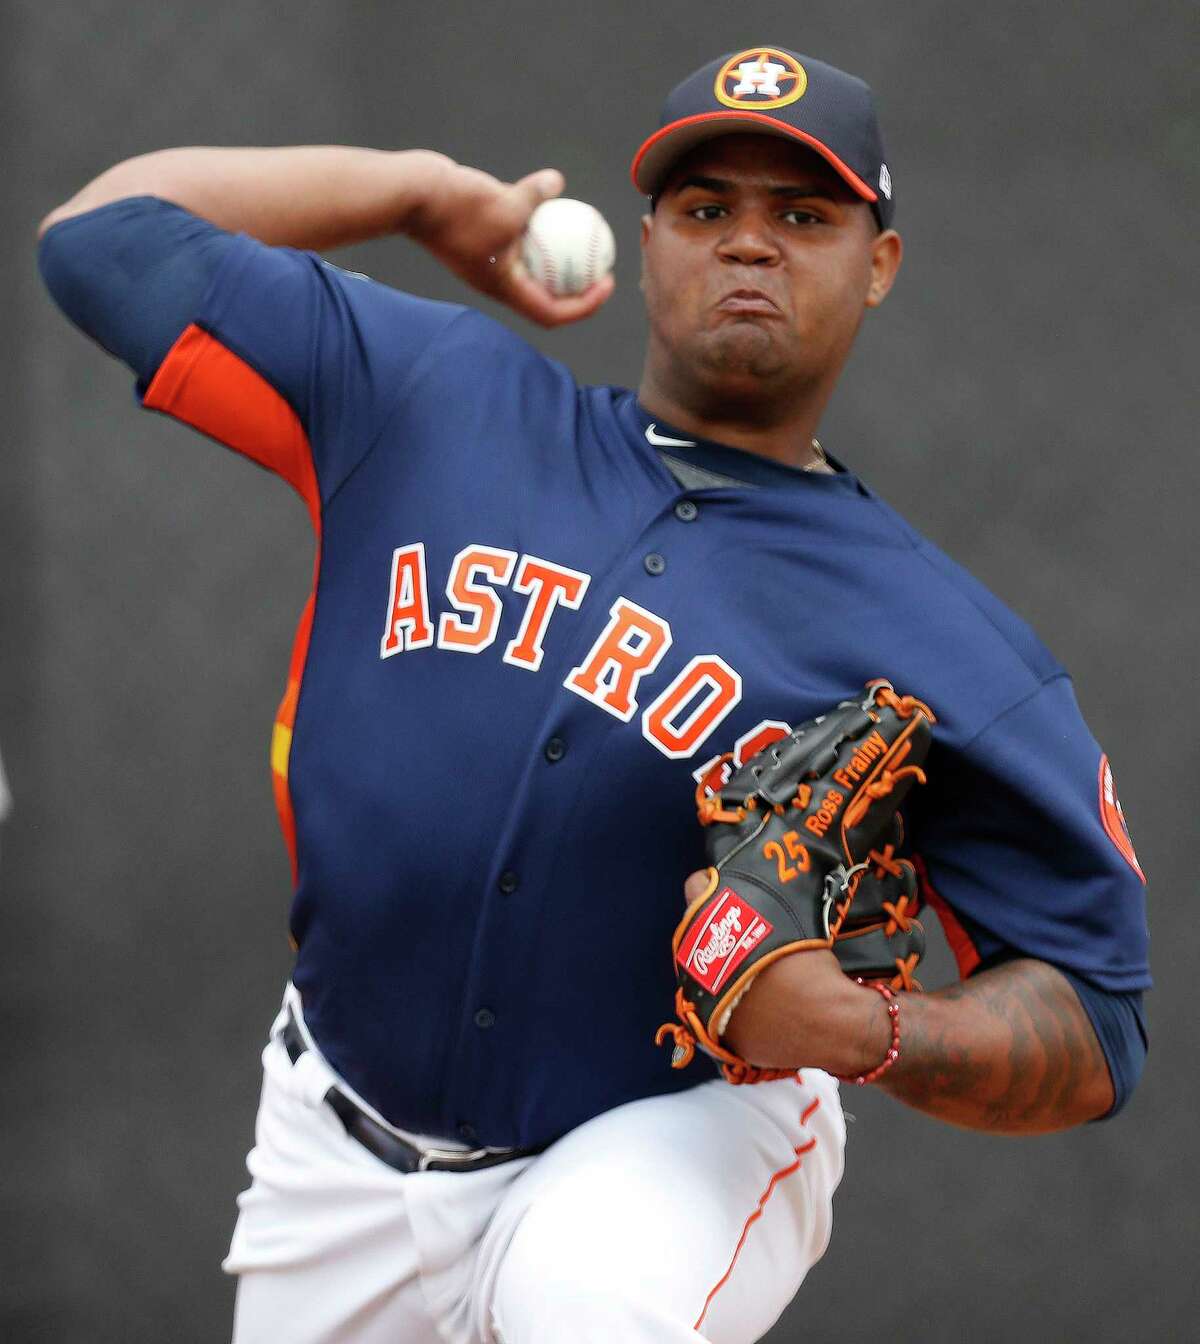 Houston Astros relief pitcher Francis Martes pitches during spring training at The Ballpark of the Palm Beaches, in West Palm Beach, Florida, Thursday, February 16, 2017.